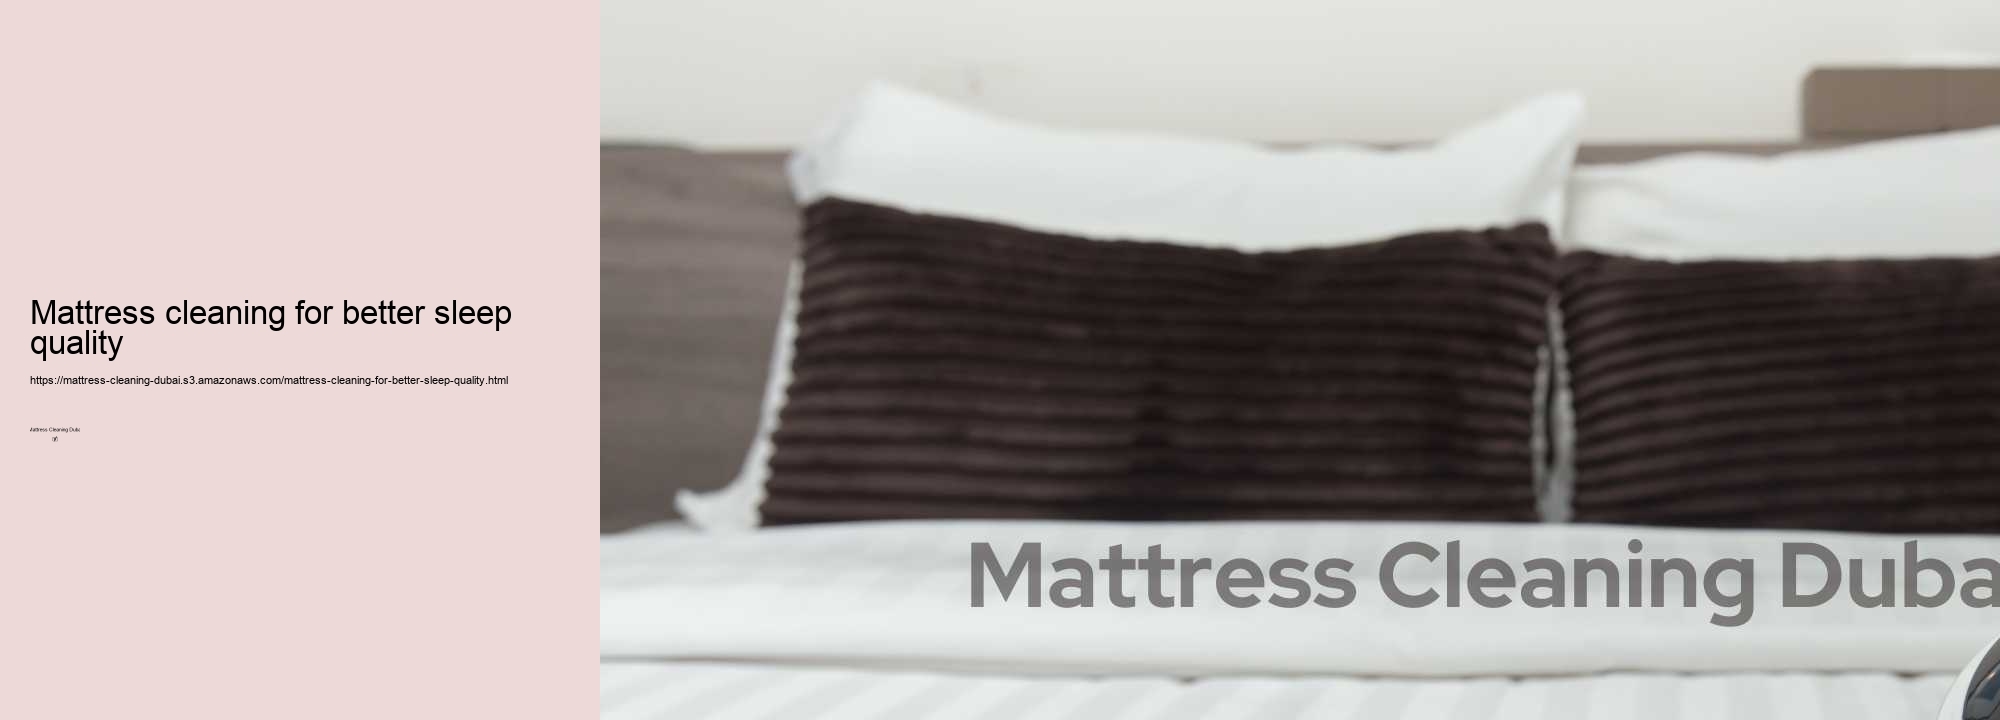 Mattress cleaning for better sleep quality